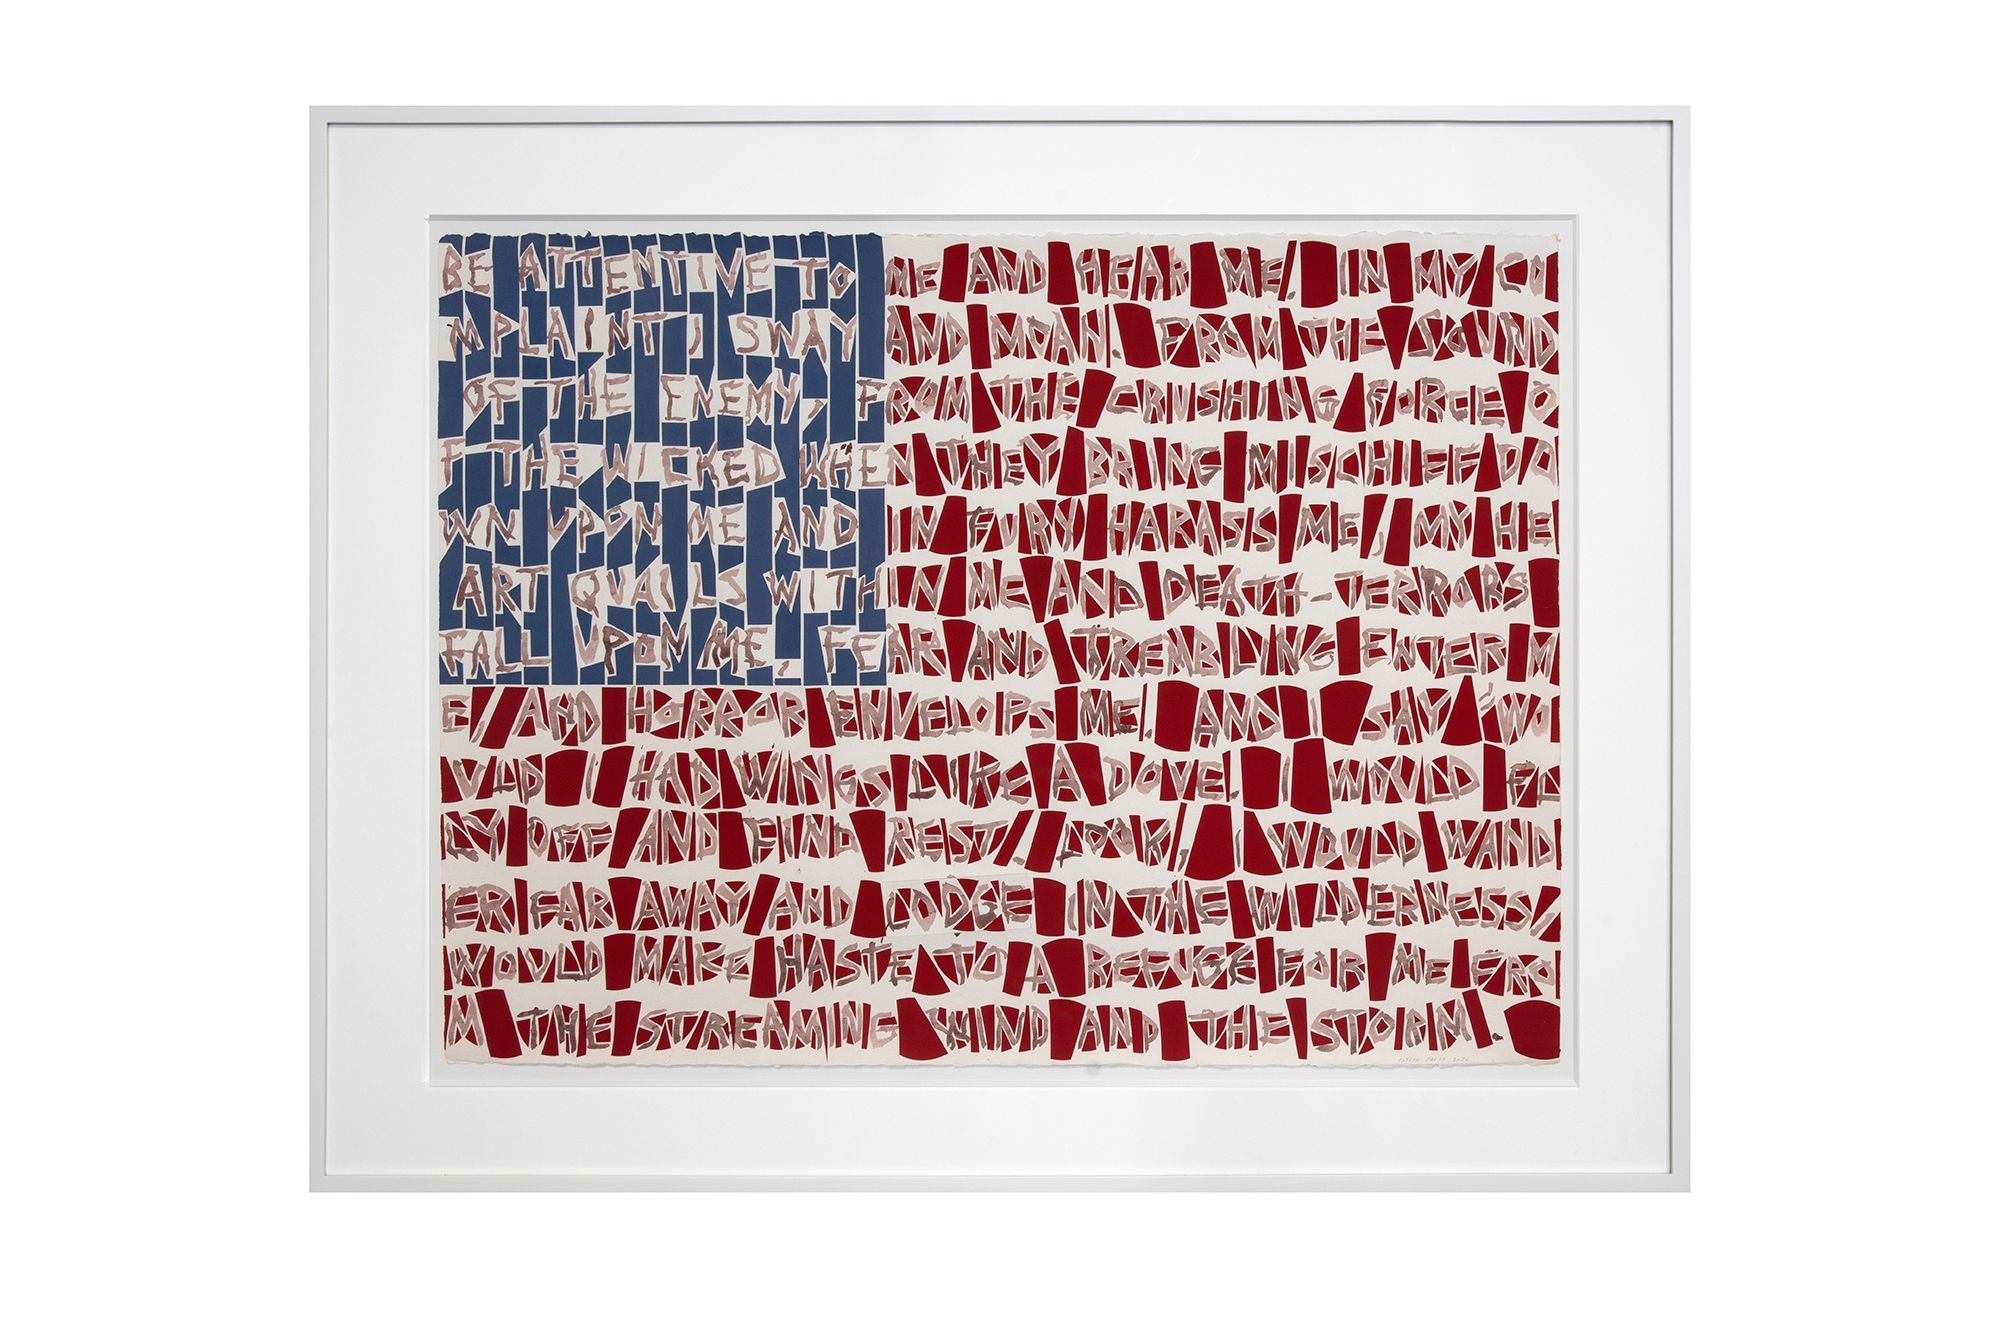 Painting of an American flag made up of rows of text